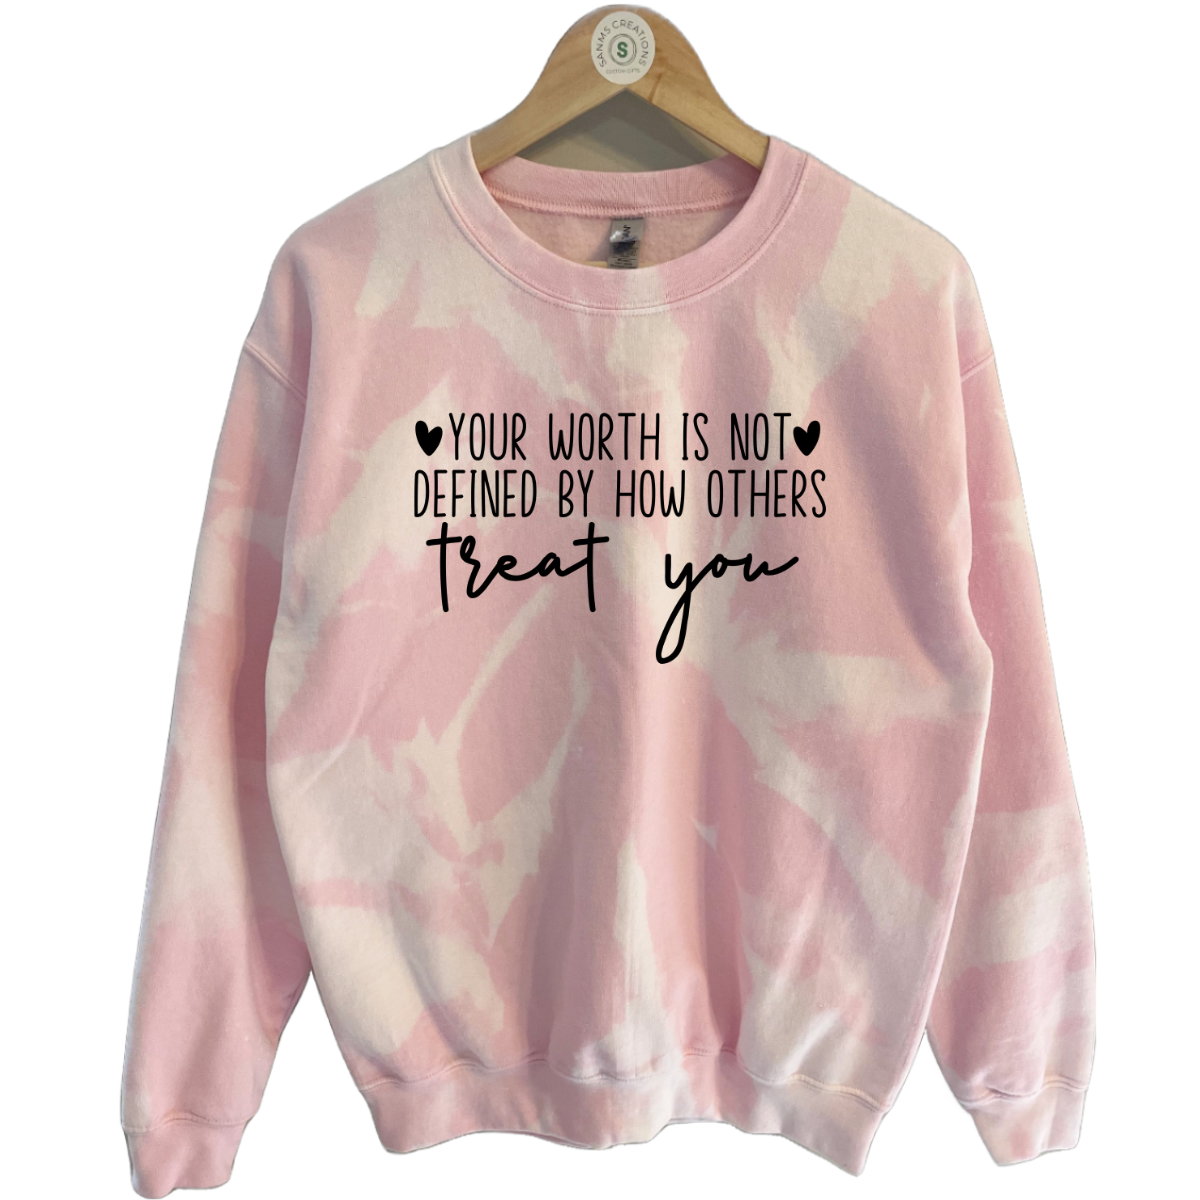 Your Worth Is Not Defined By How Others Treat You Sweatshirt